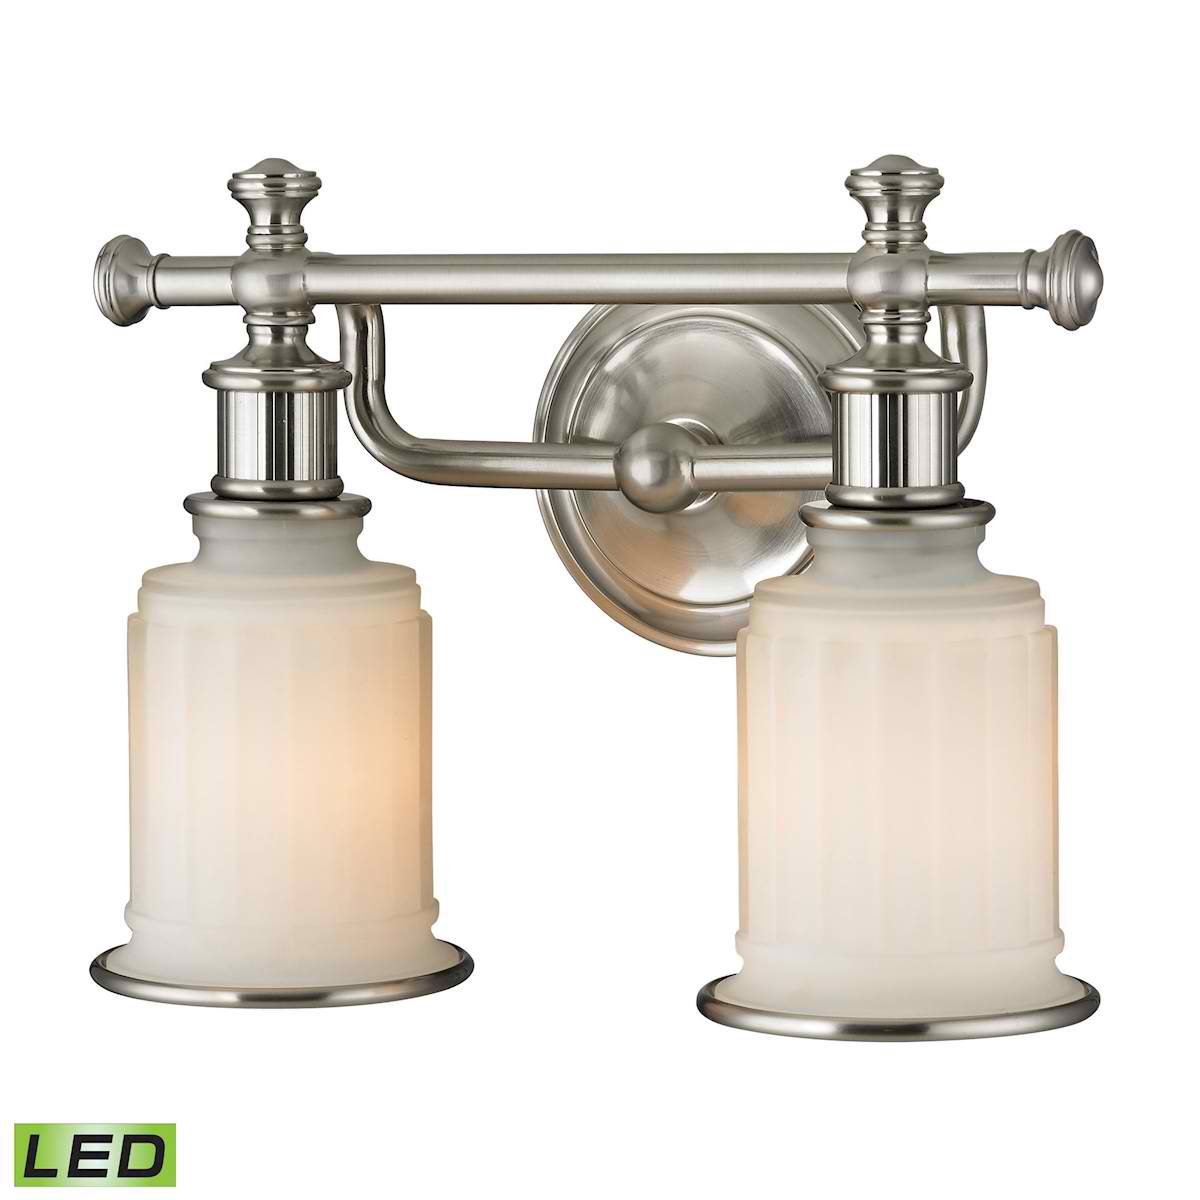 Acadia Collection 2 Light Bath in Brushed Nickel - LED, 800 Lumens (1600 Lumens Total) with Full Scale